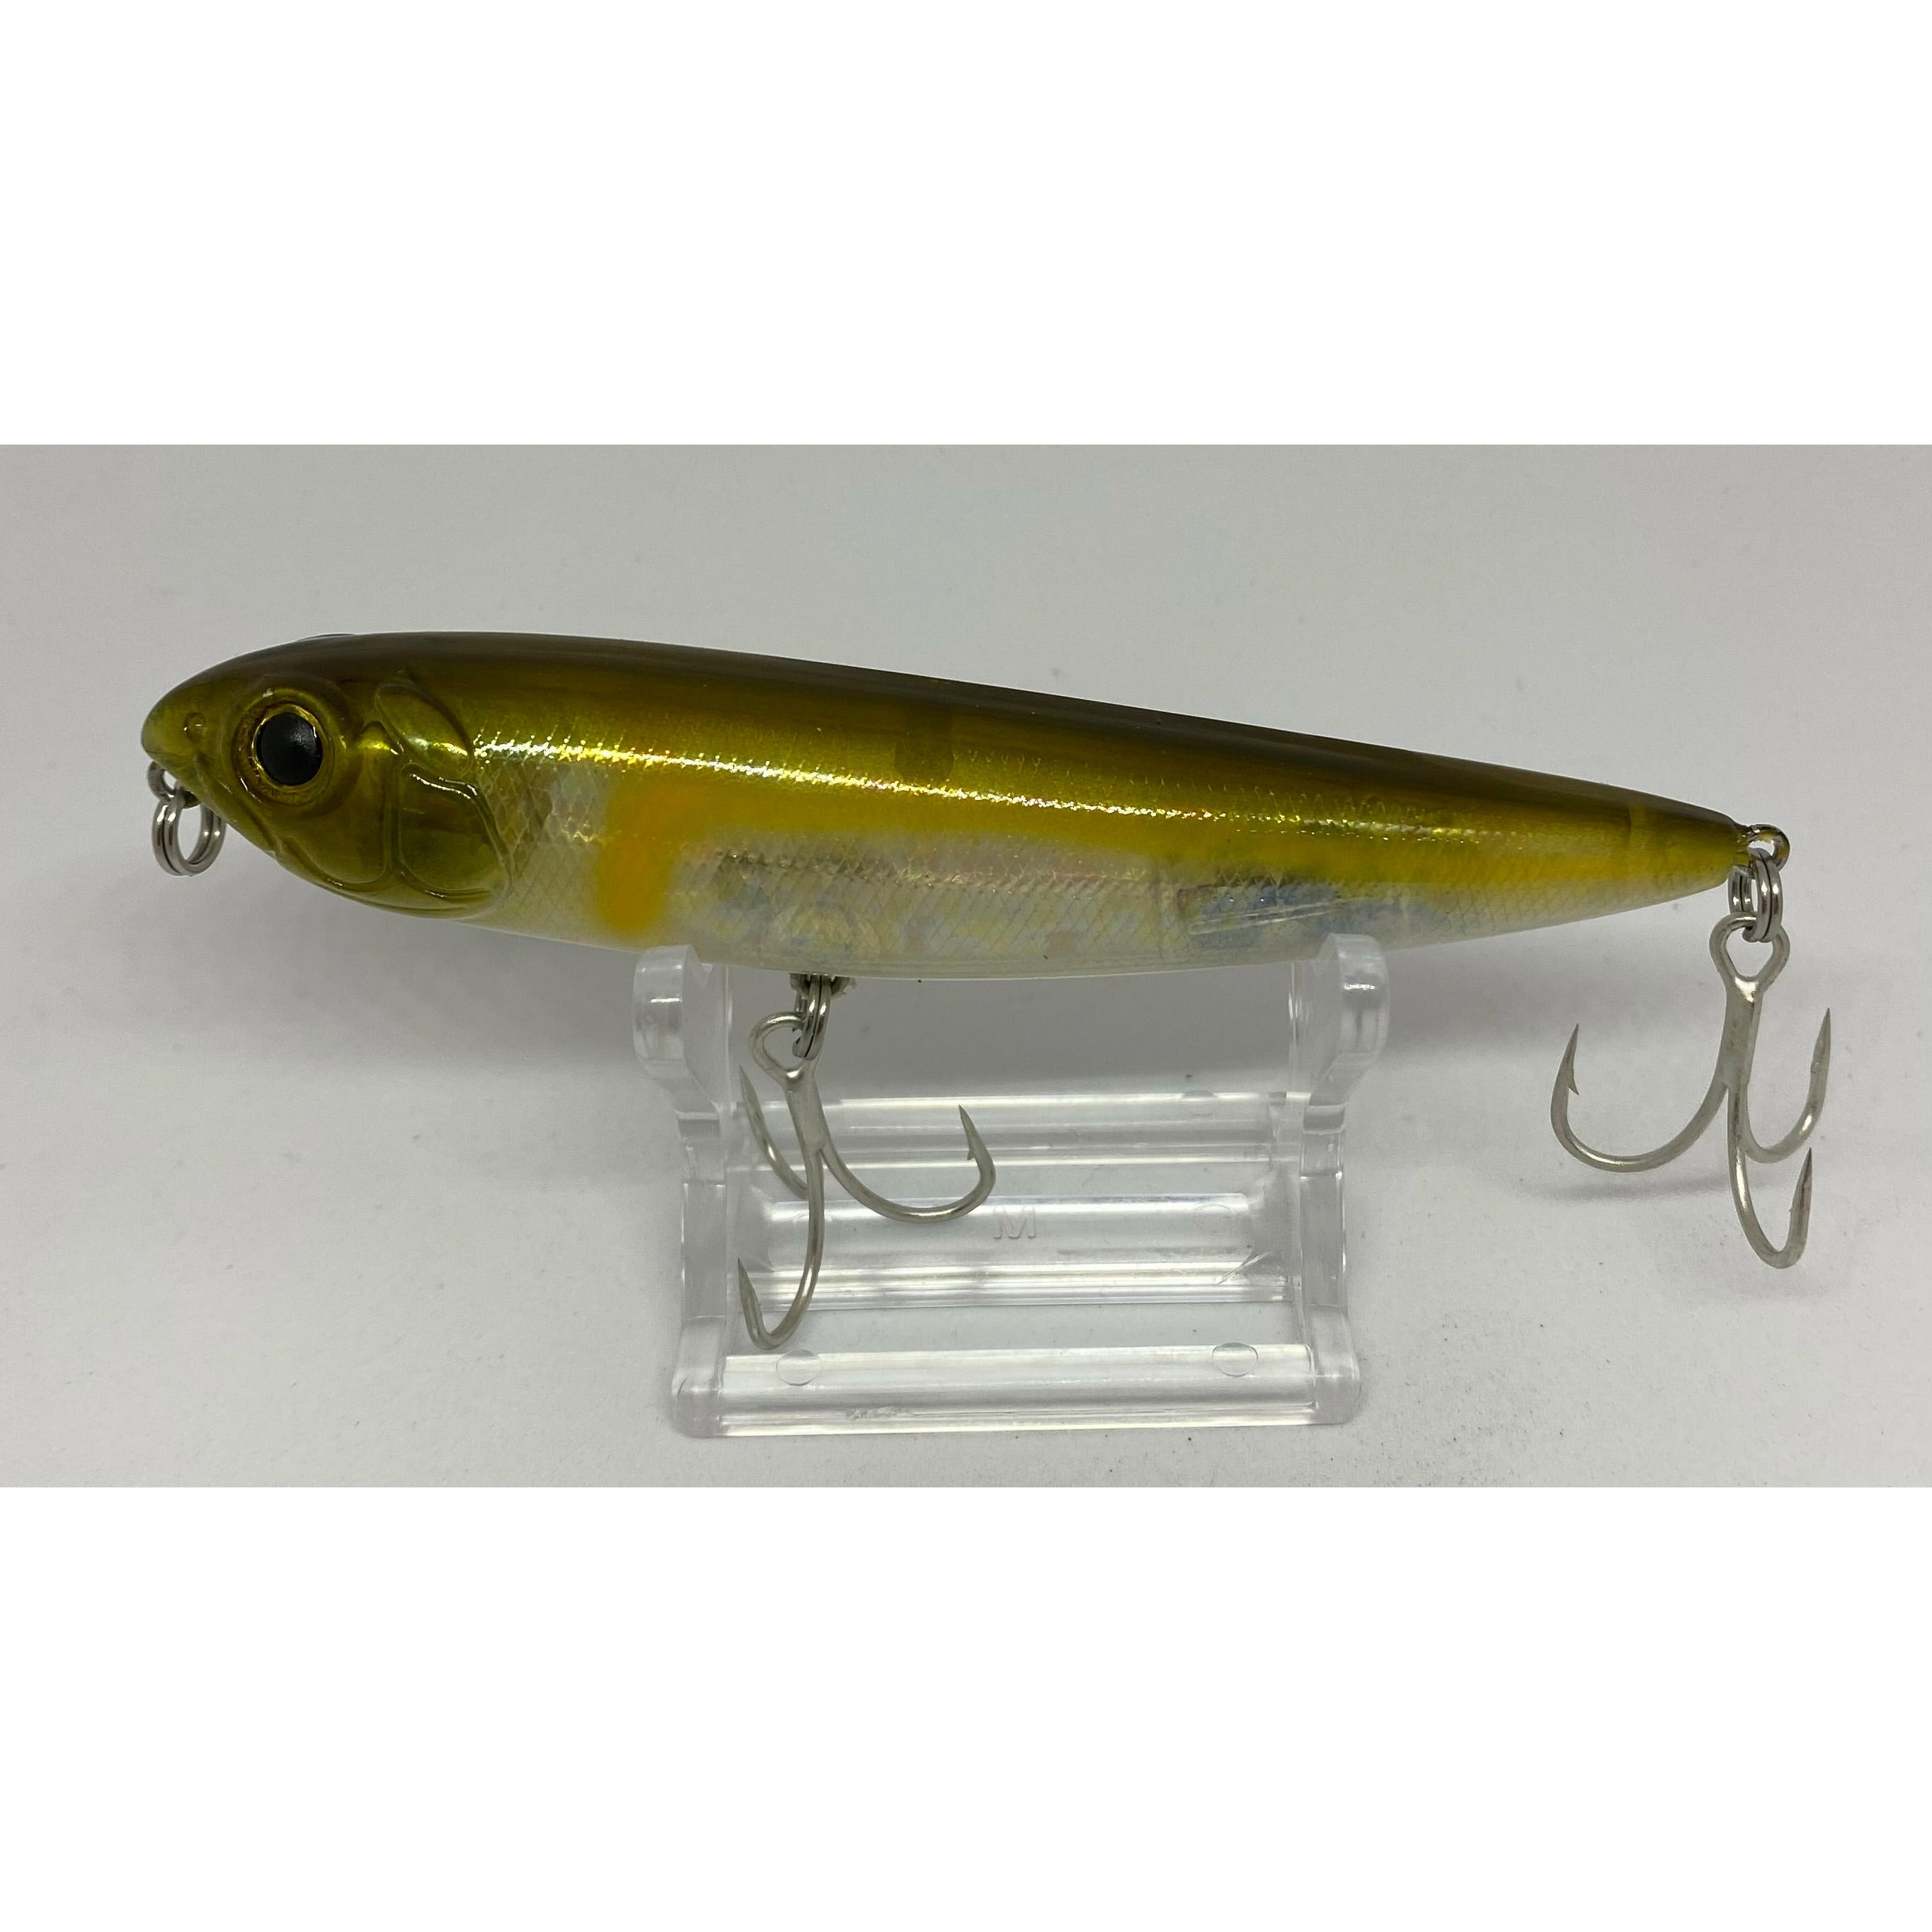 Small Surface Lure 105mm 16g